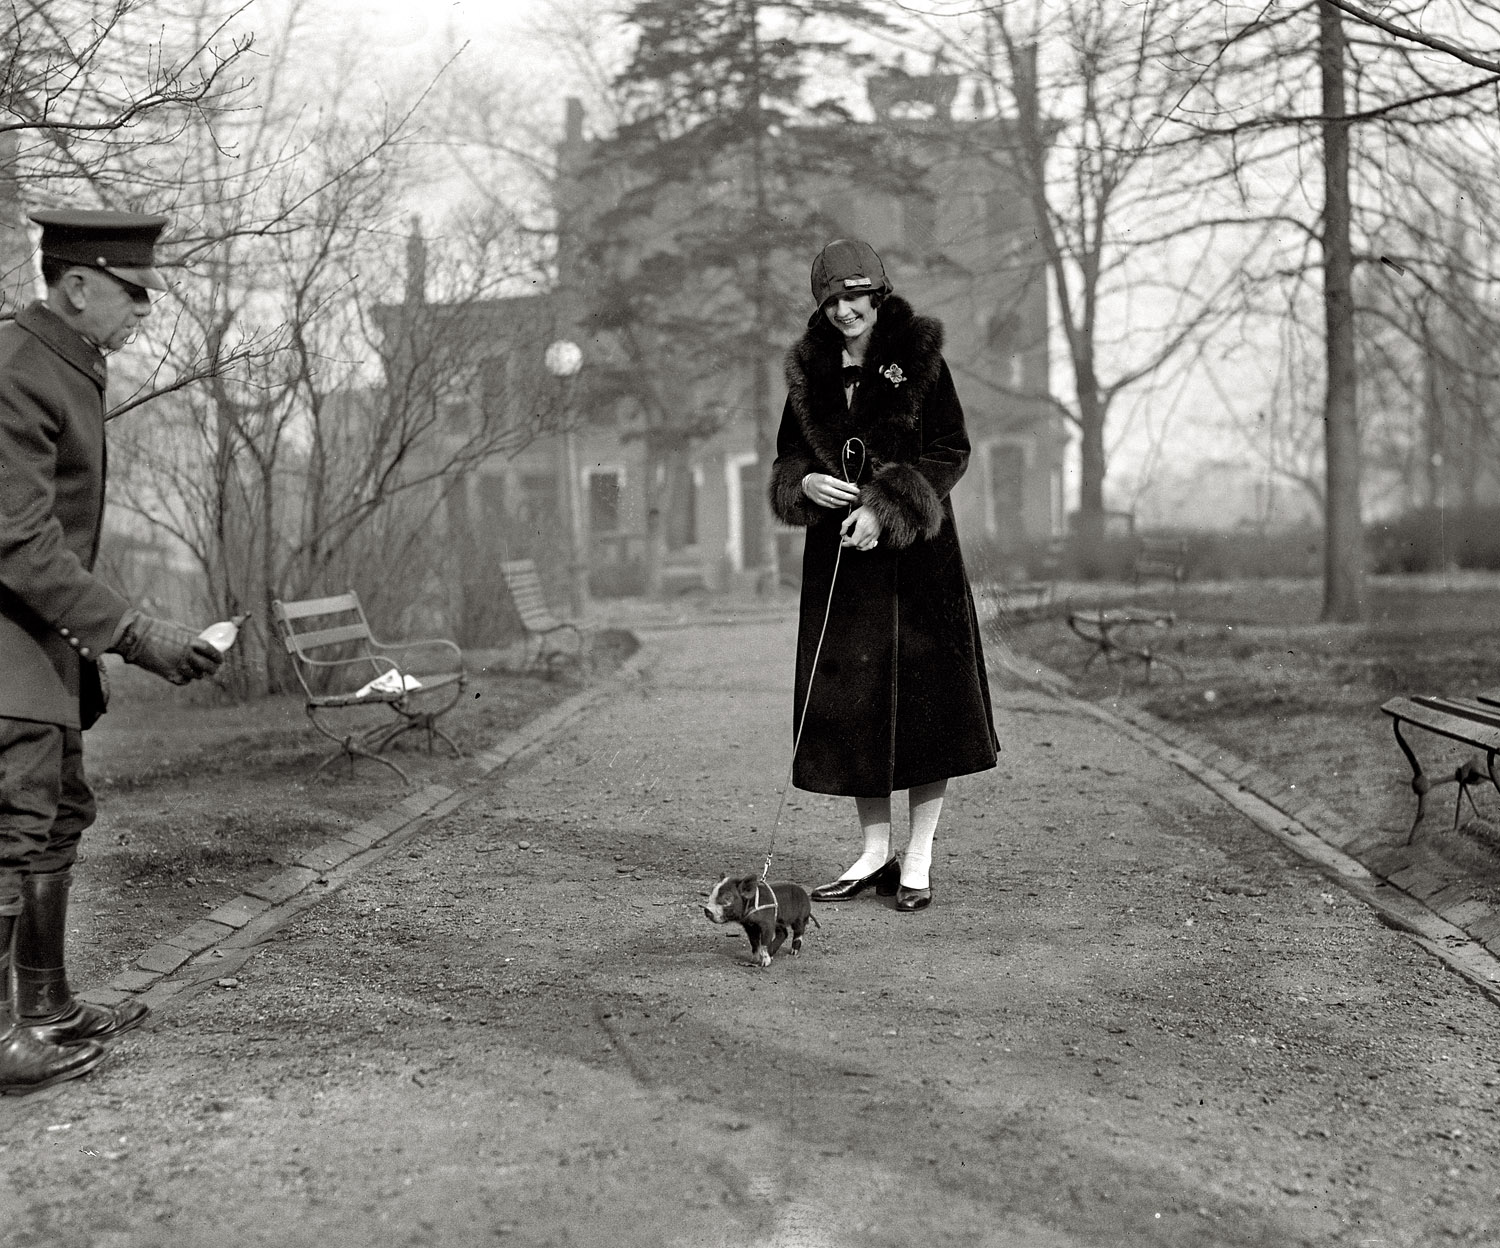 December 1, 1925. Miss Lois Hoover and pig out for a stroll in Washington. With a chauffeur to do the heavy lifting. View full size. National Photo Company.